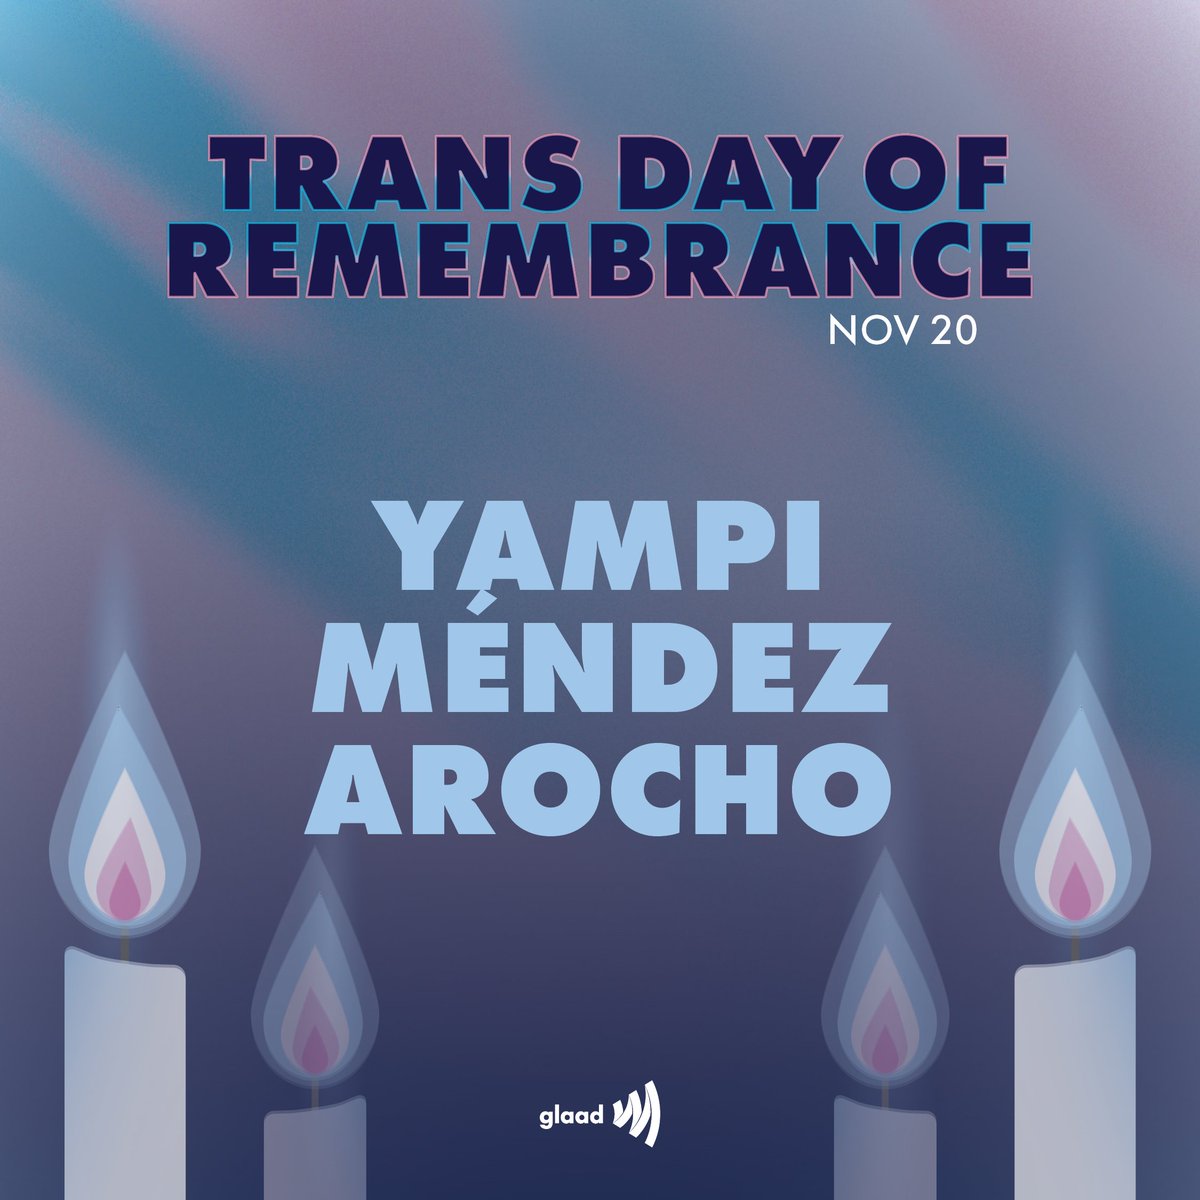 Yampi Méndez Arocho, a transgender man, was killed in Moca, Puerto Rico on March 5, 2020. He was 19 years old. He loved basketball and the NBA, his Facebook bio had one line, “Humility Prevails.”